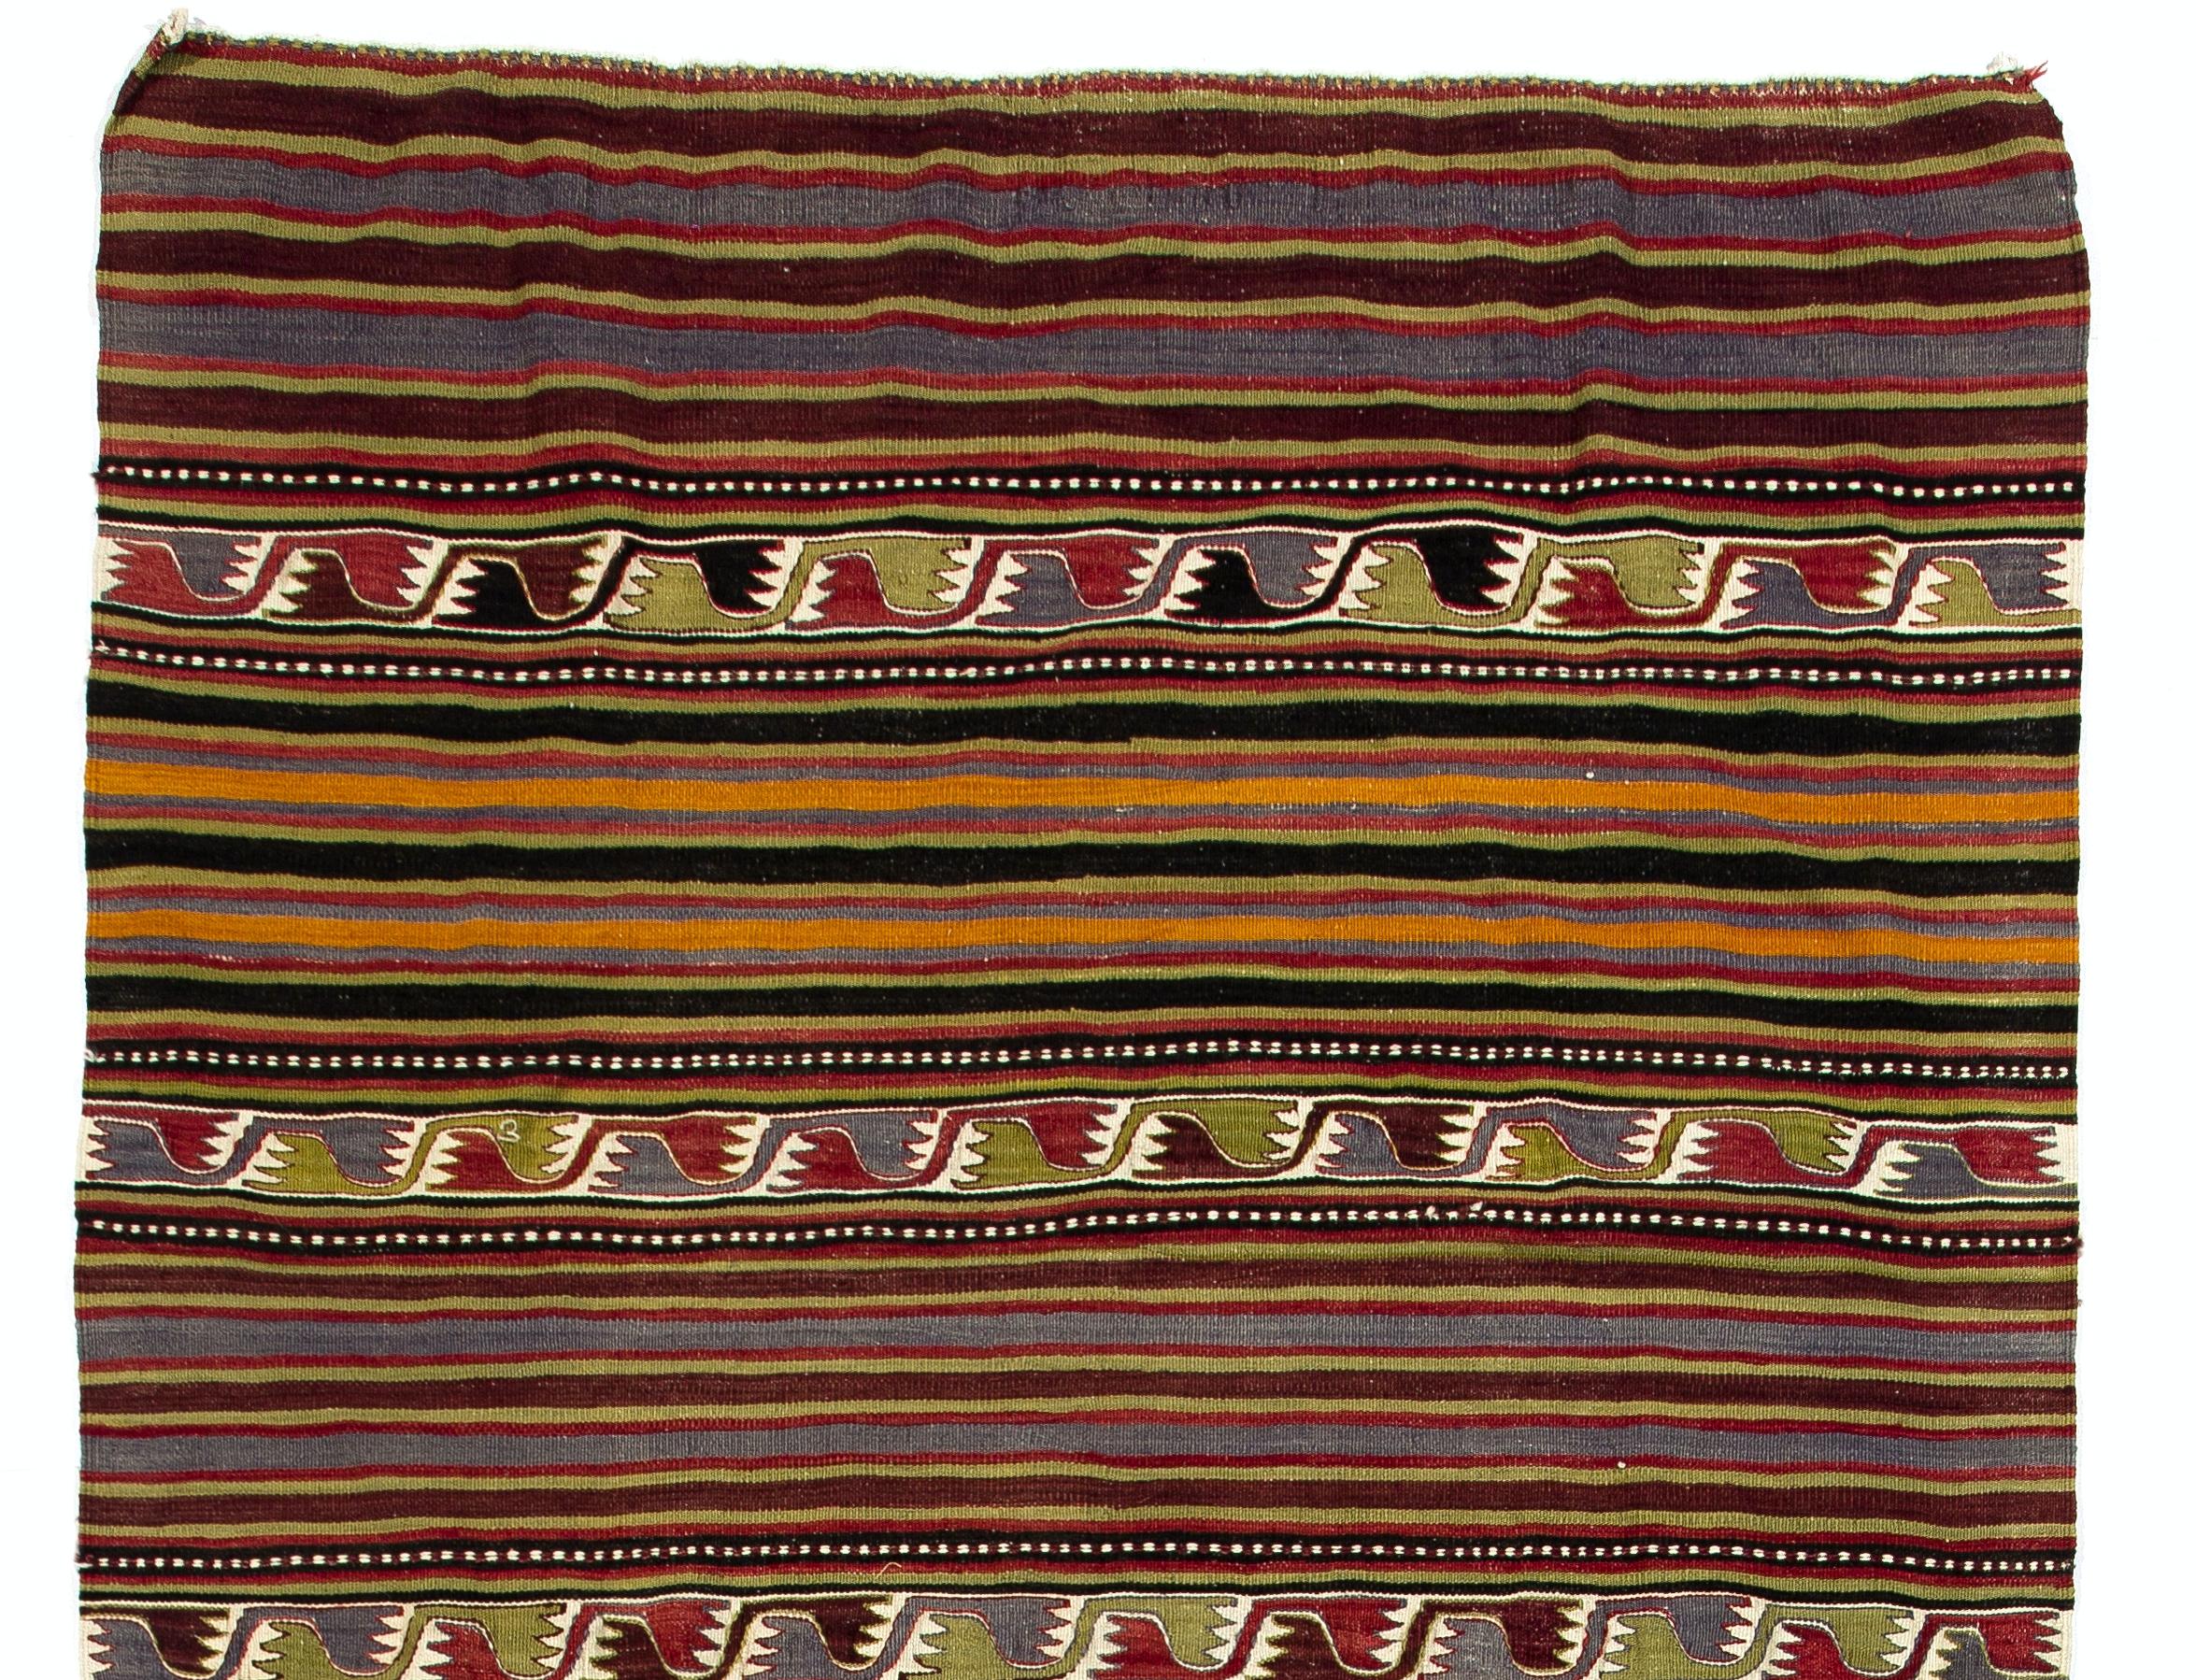 This authentic handwoven flat-weave (Kilim) from Central Turkey was made by Nomads to be used as a floor covering in their tents or summer houses around mid-20th century. It is made of multi colored wool. Measures: 5.2 x 12.7 ft.

These vintage